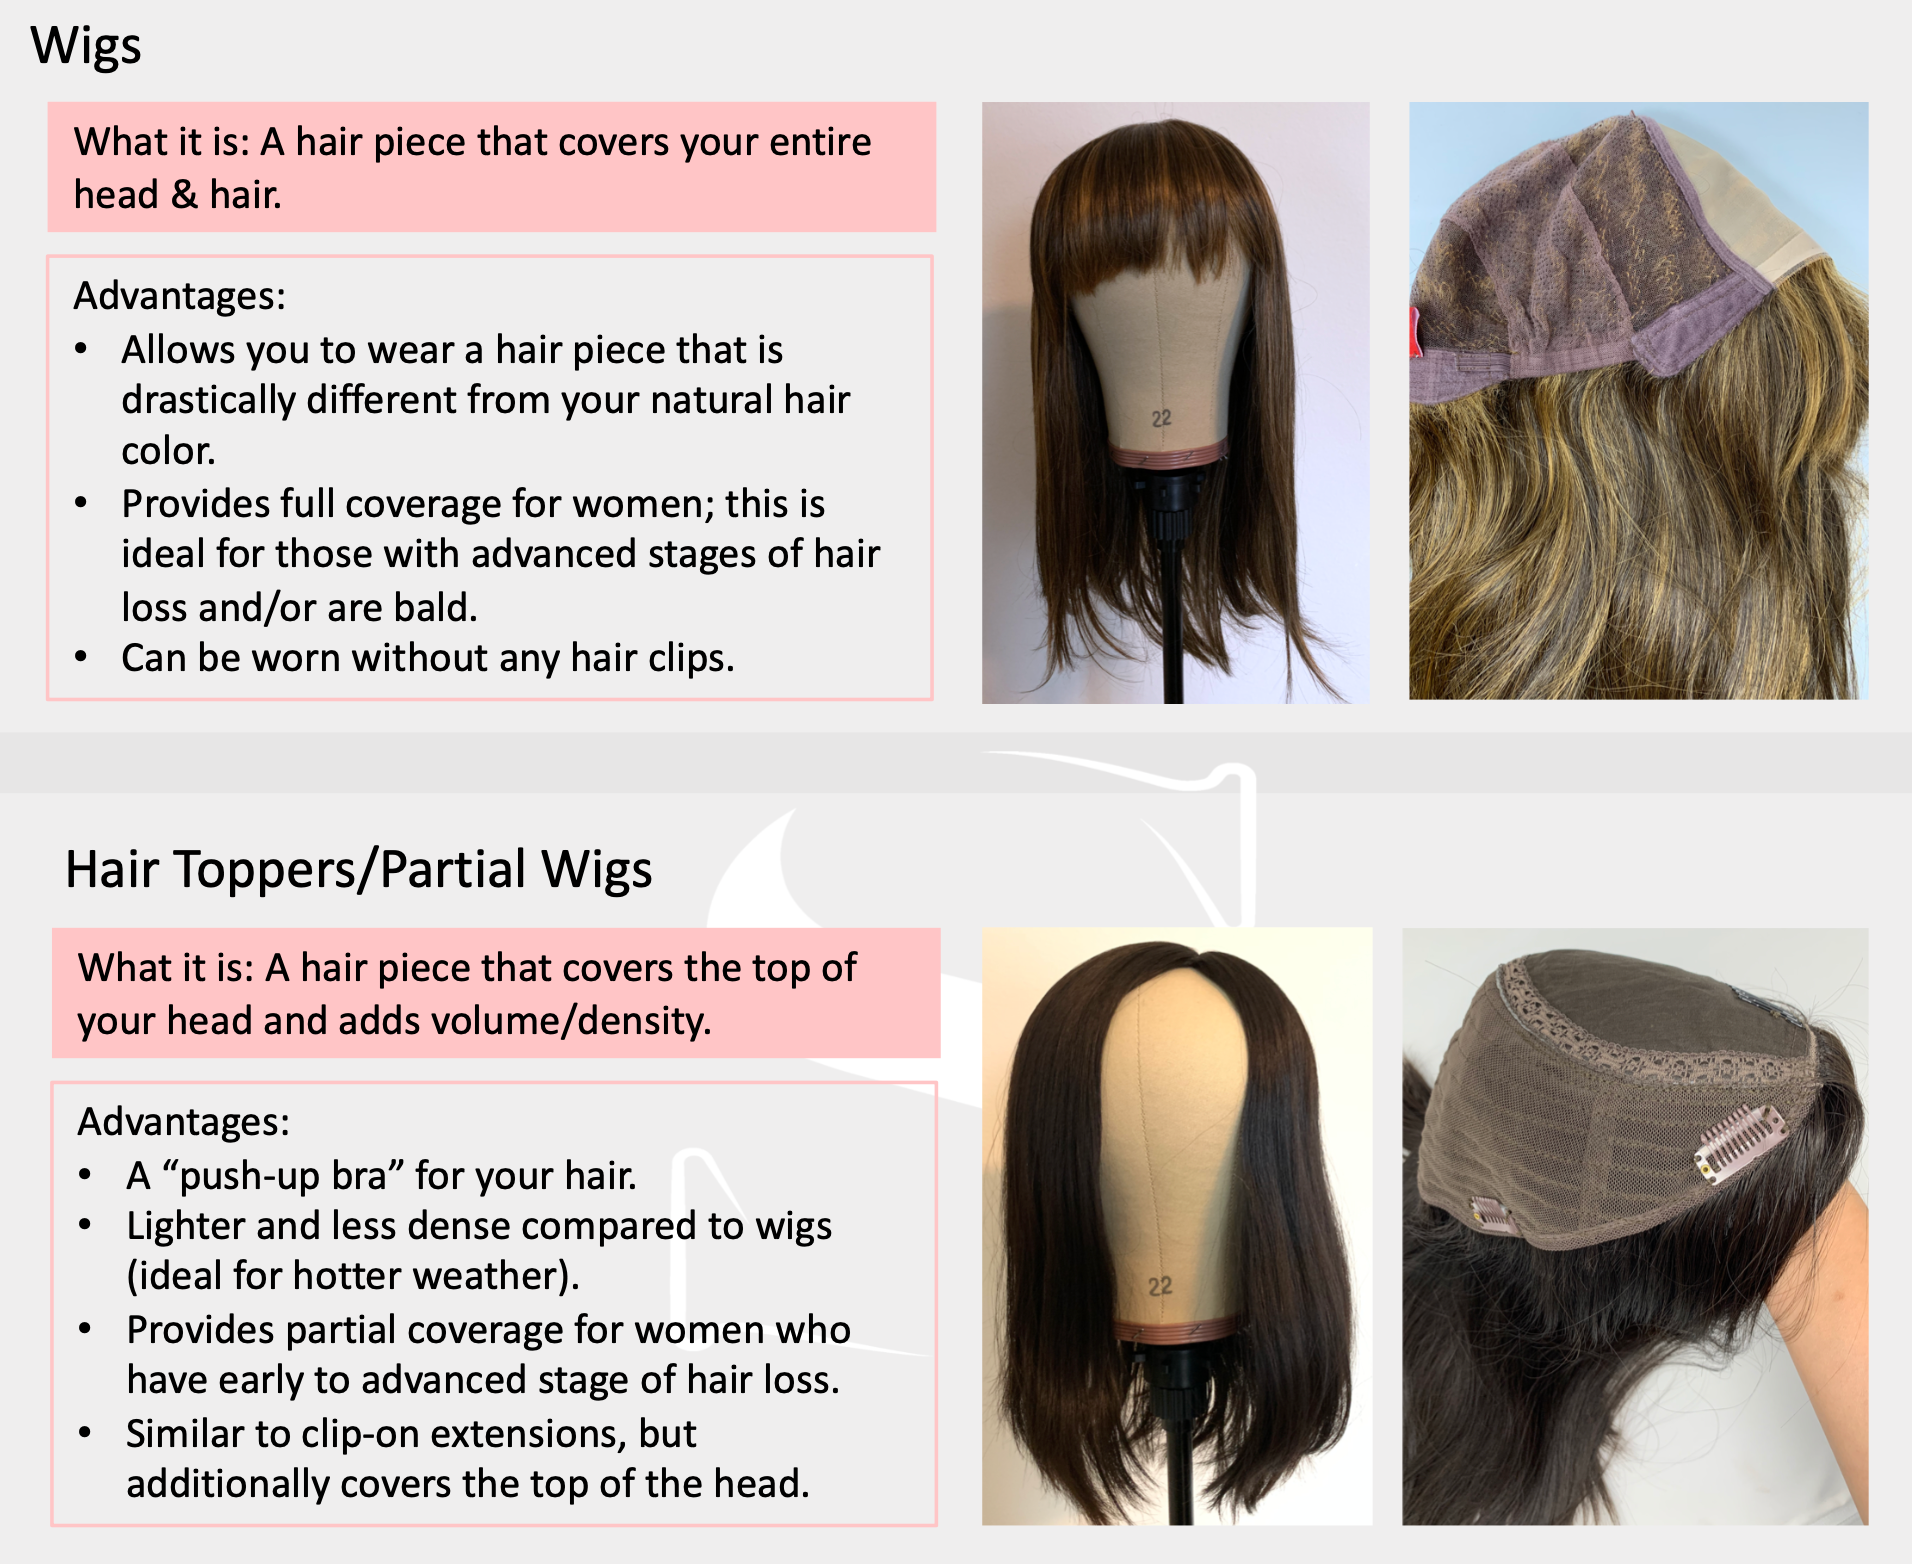 Hair Loss From Hair Extensions? Here's What You Should Know